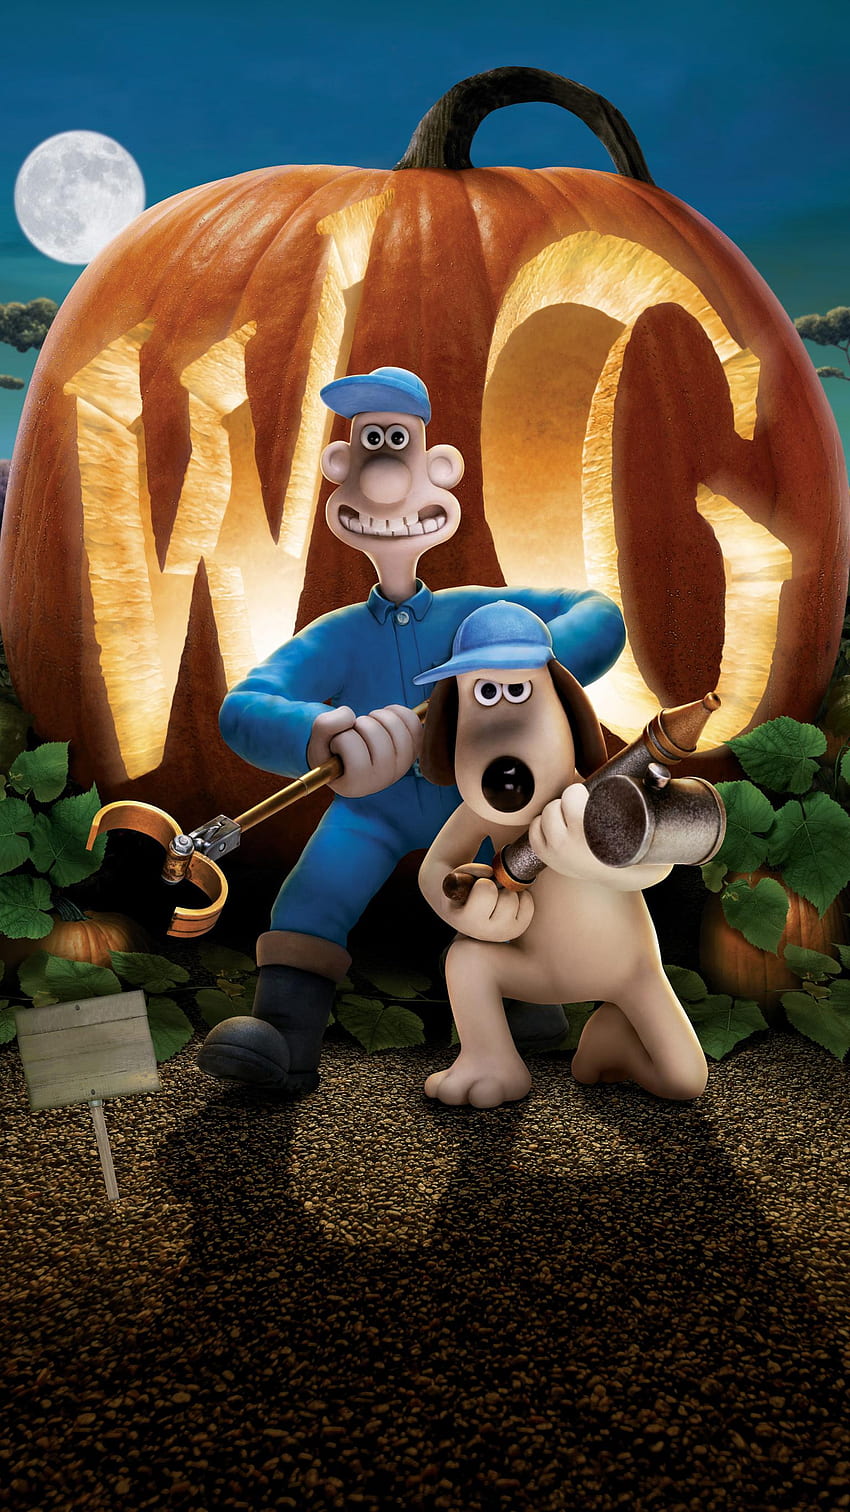 Wallace & Gromit: The Curse of the Were-Rabbit (2022) movie HD phone wallpaper